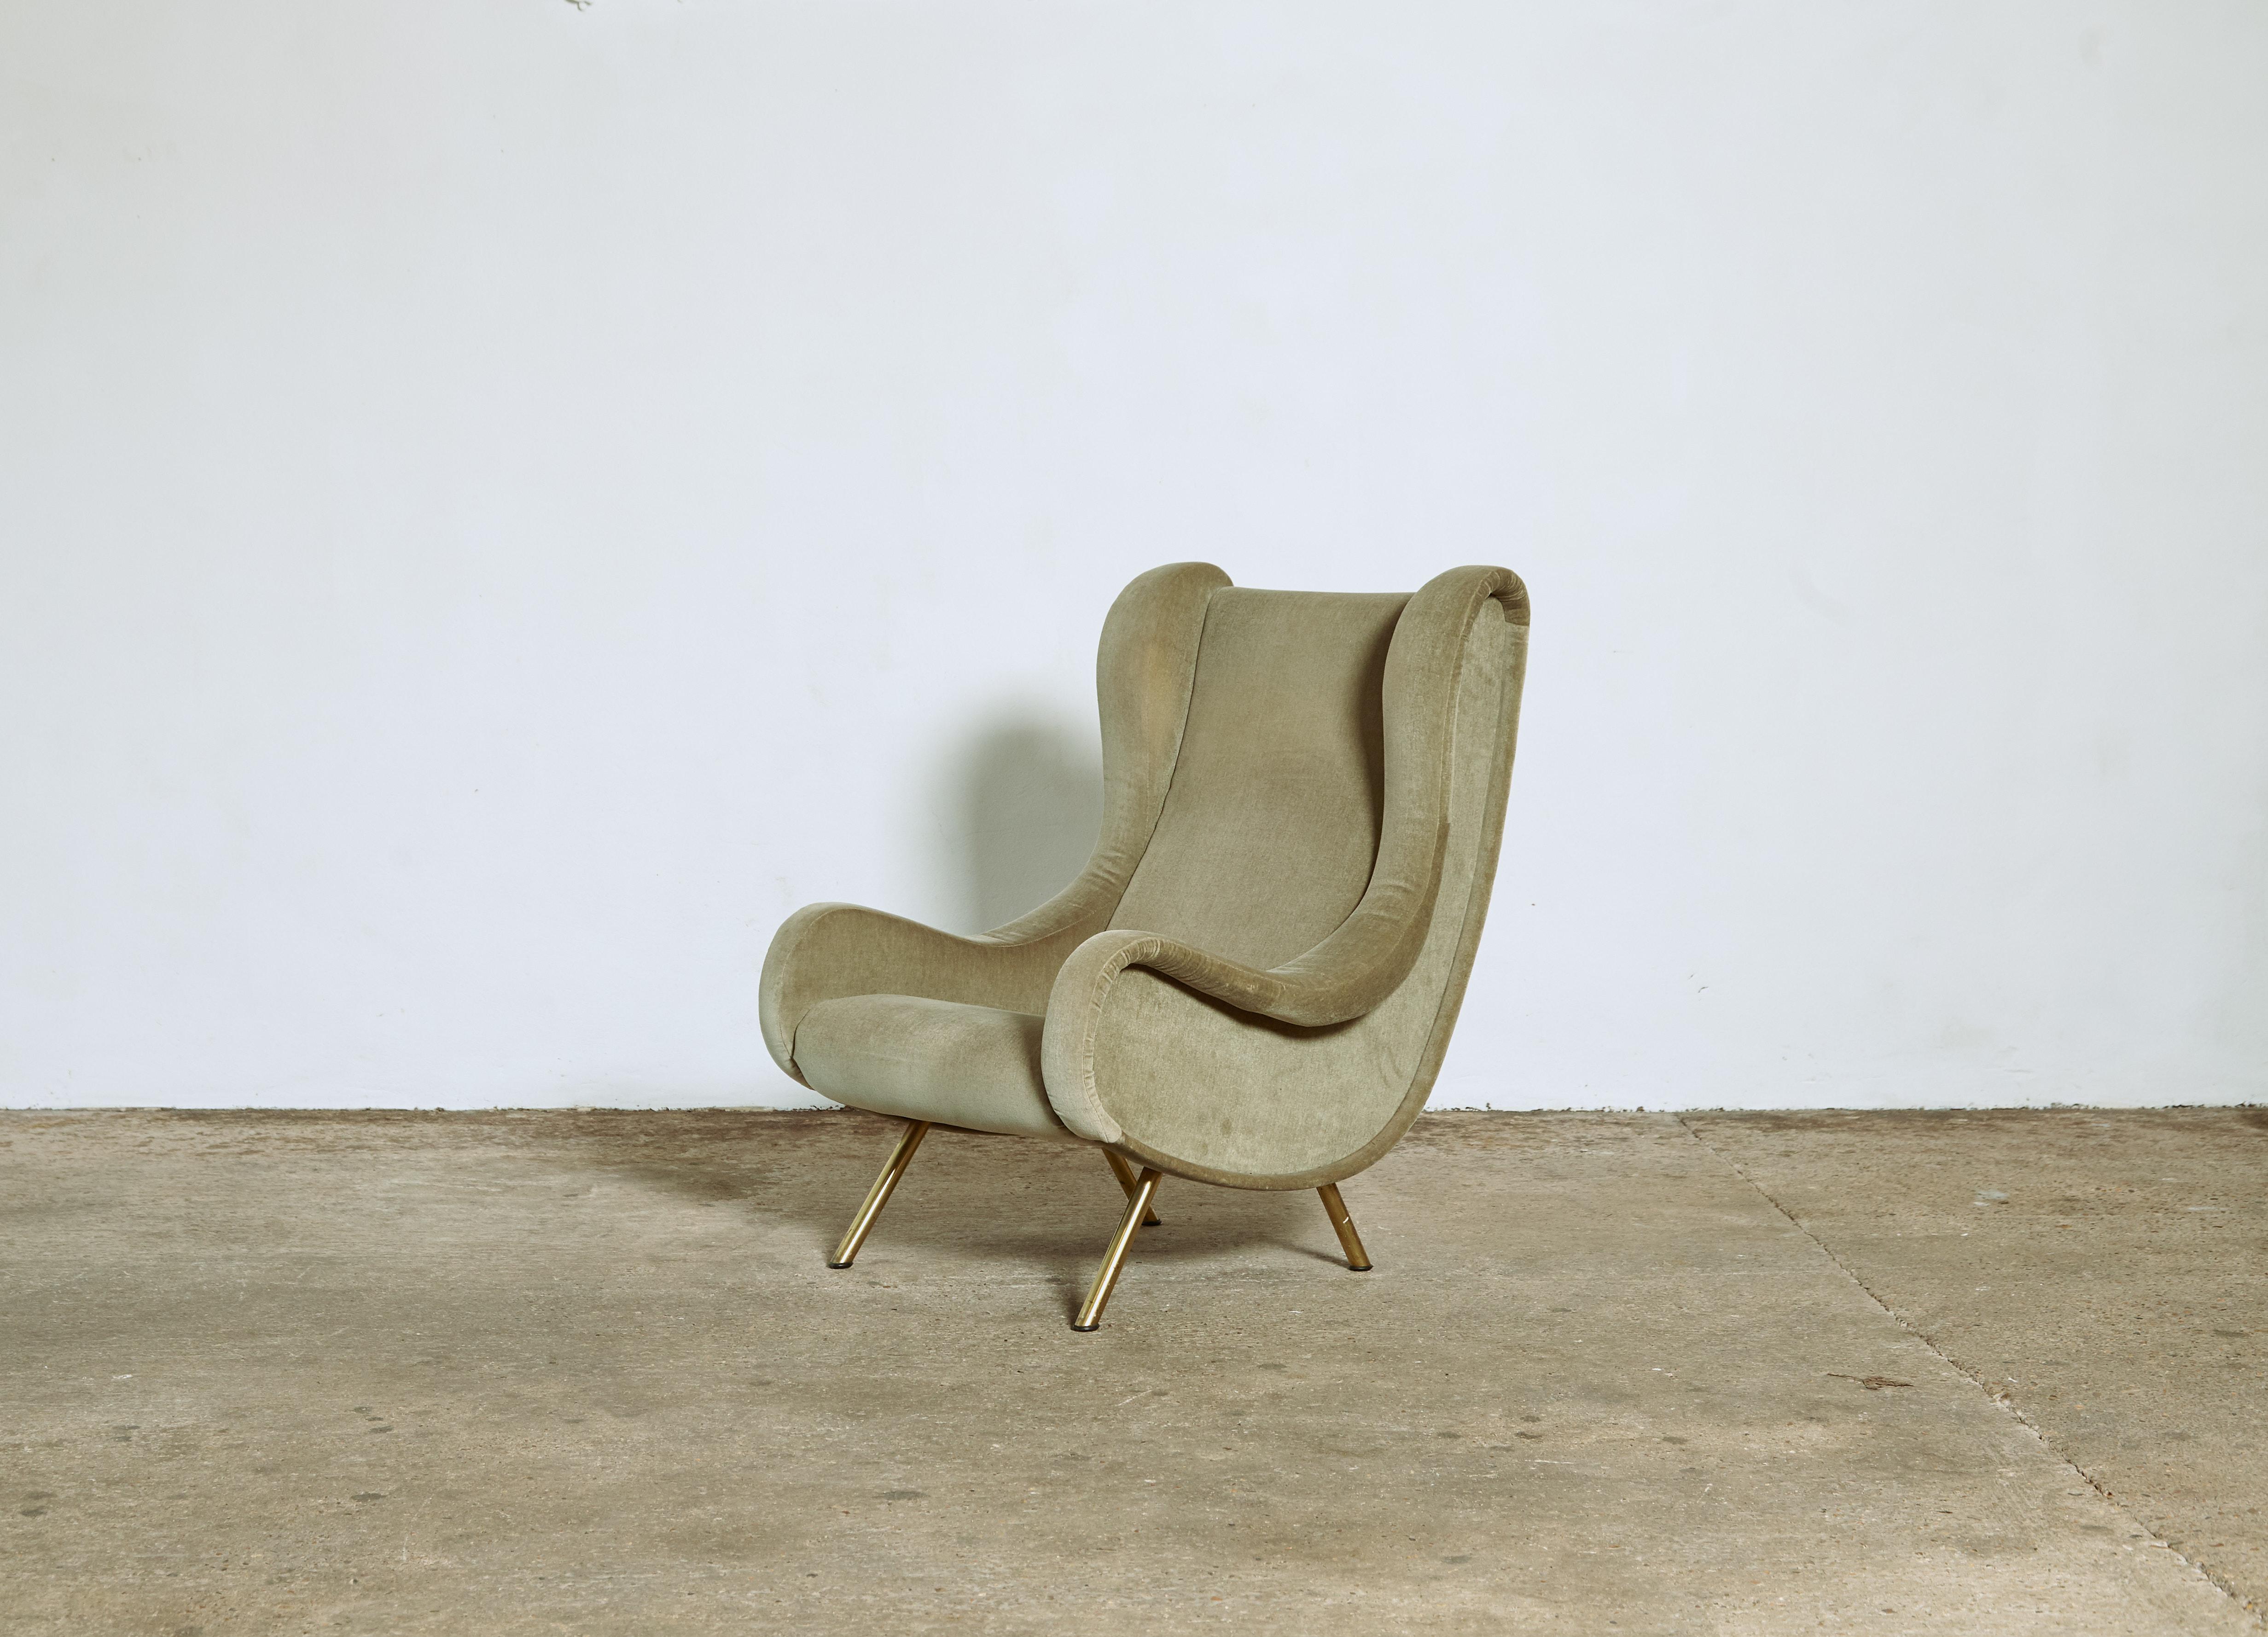 A lovely authentic Marco Zanuso senior chair, Arflex, France/Italy, 1960s. Sage green velvet fabric. Ready to use.